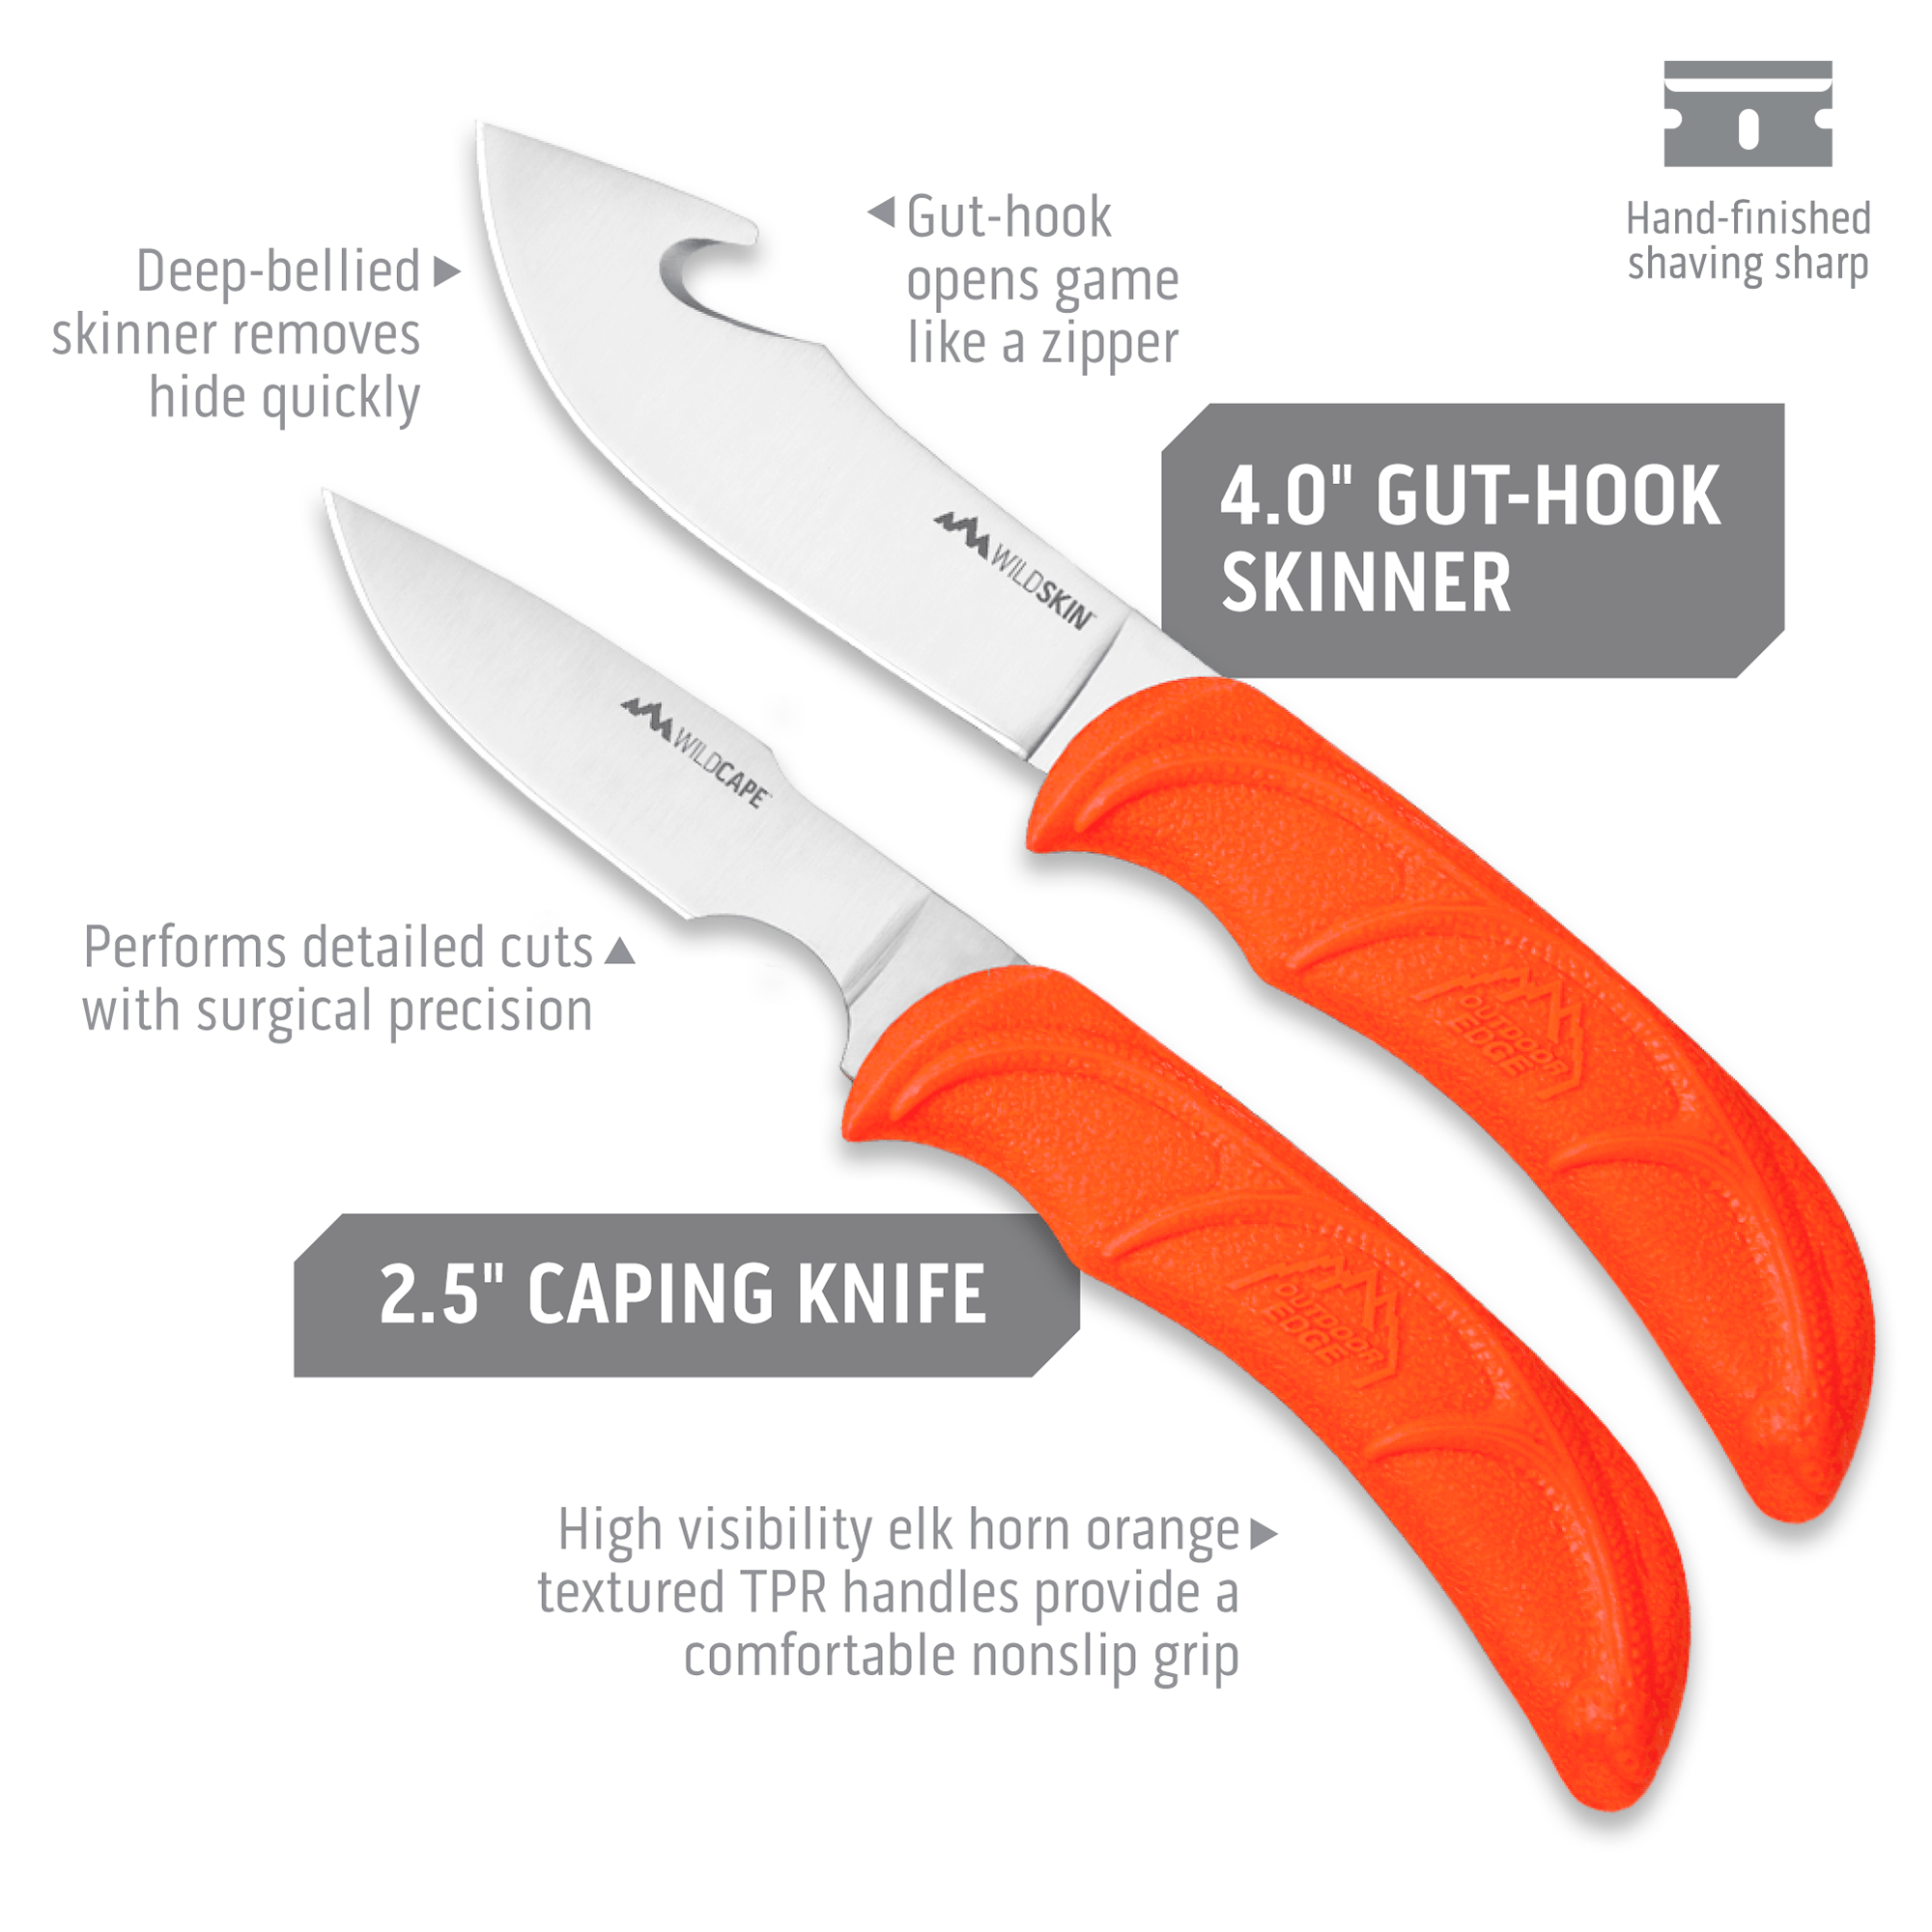 Outdoor Edge WildGuide Hunting Knife Set Product Photo showing caping knife and gut-hook skinner blade lengths.